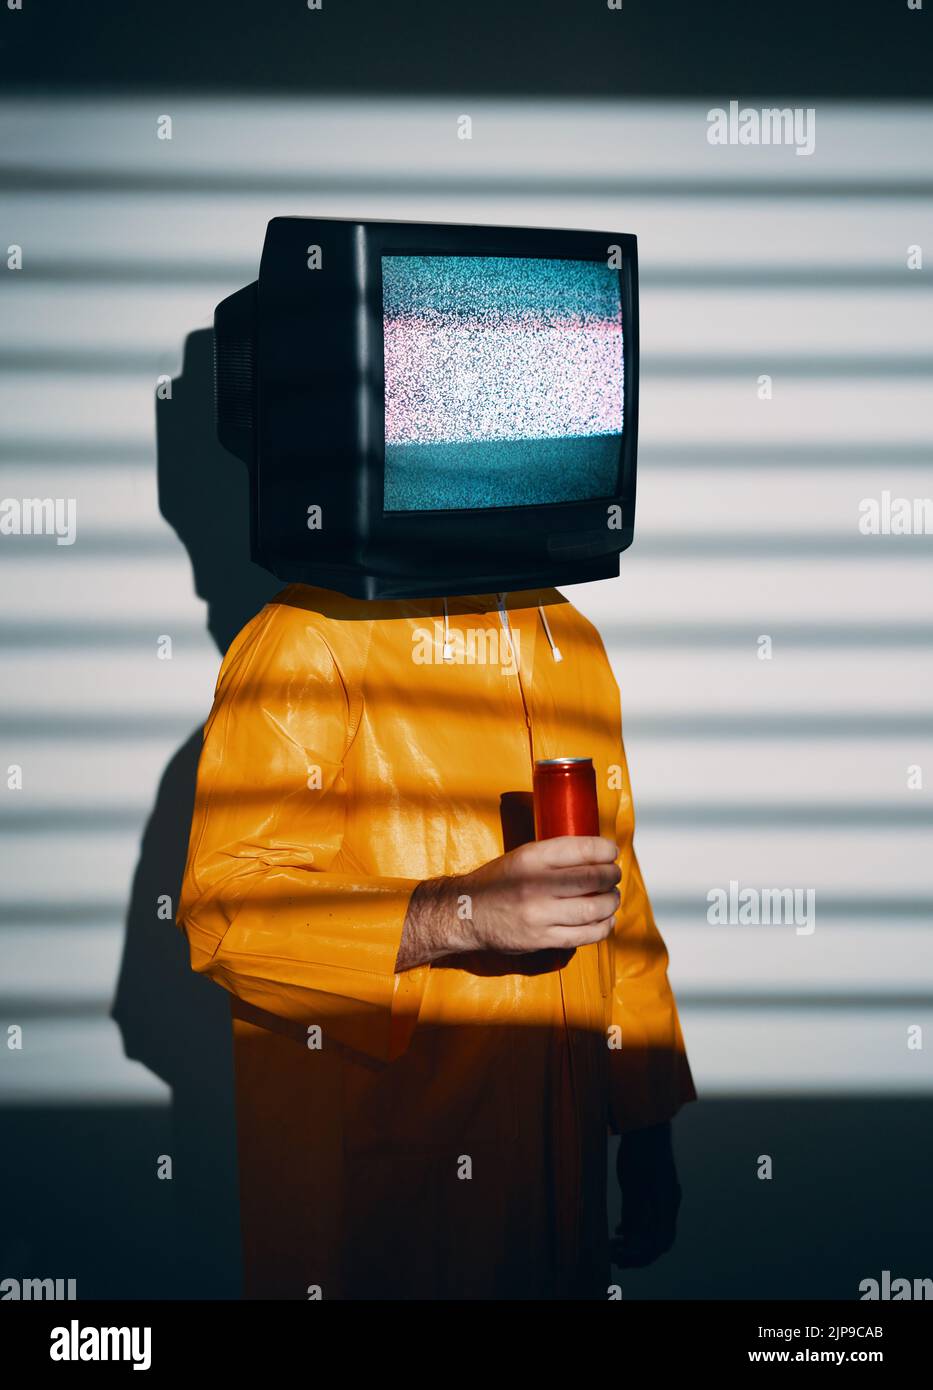 Surreal art of TV addicted man with television instead of head. Media zombie concept with male in bright yellow raincoat holding sweet soda in a red c Stock Photo